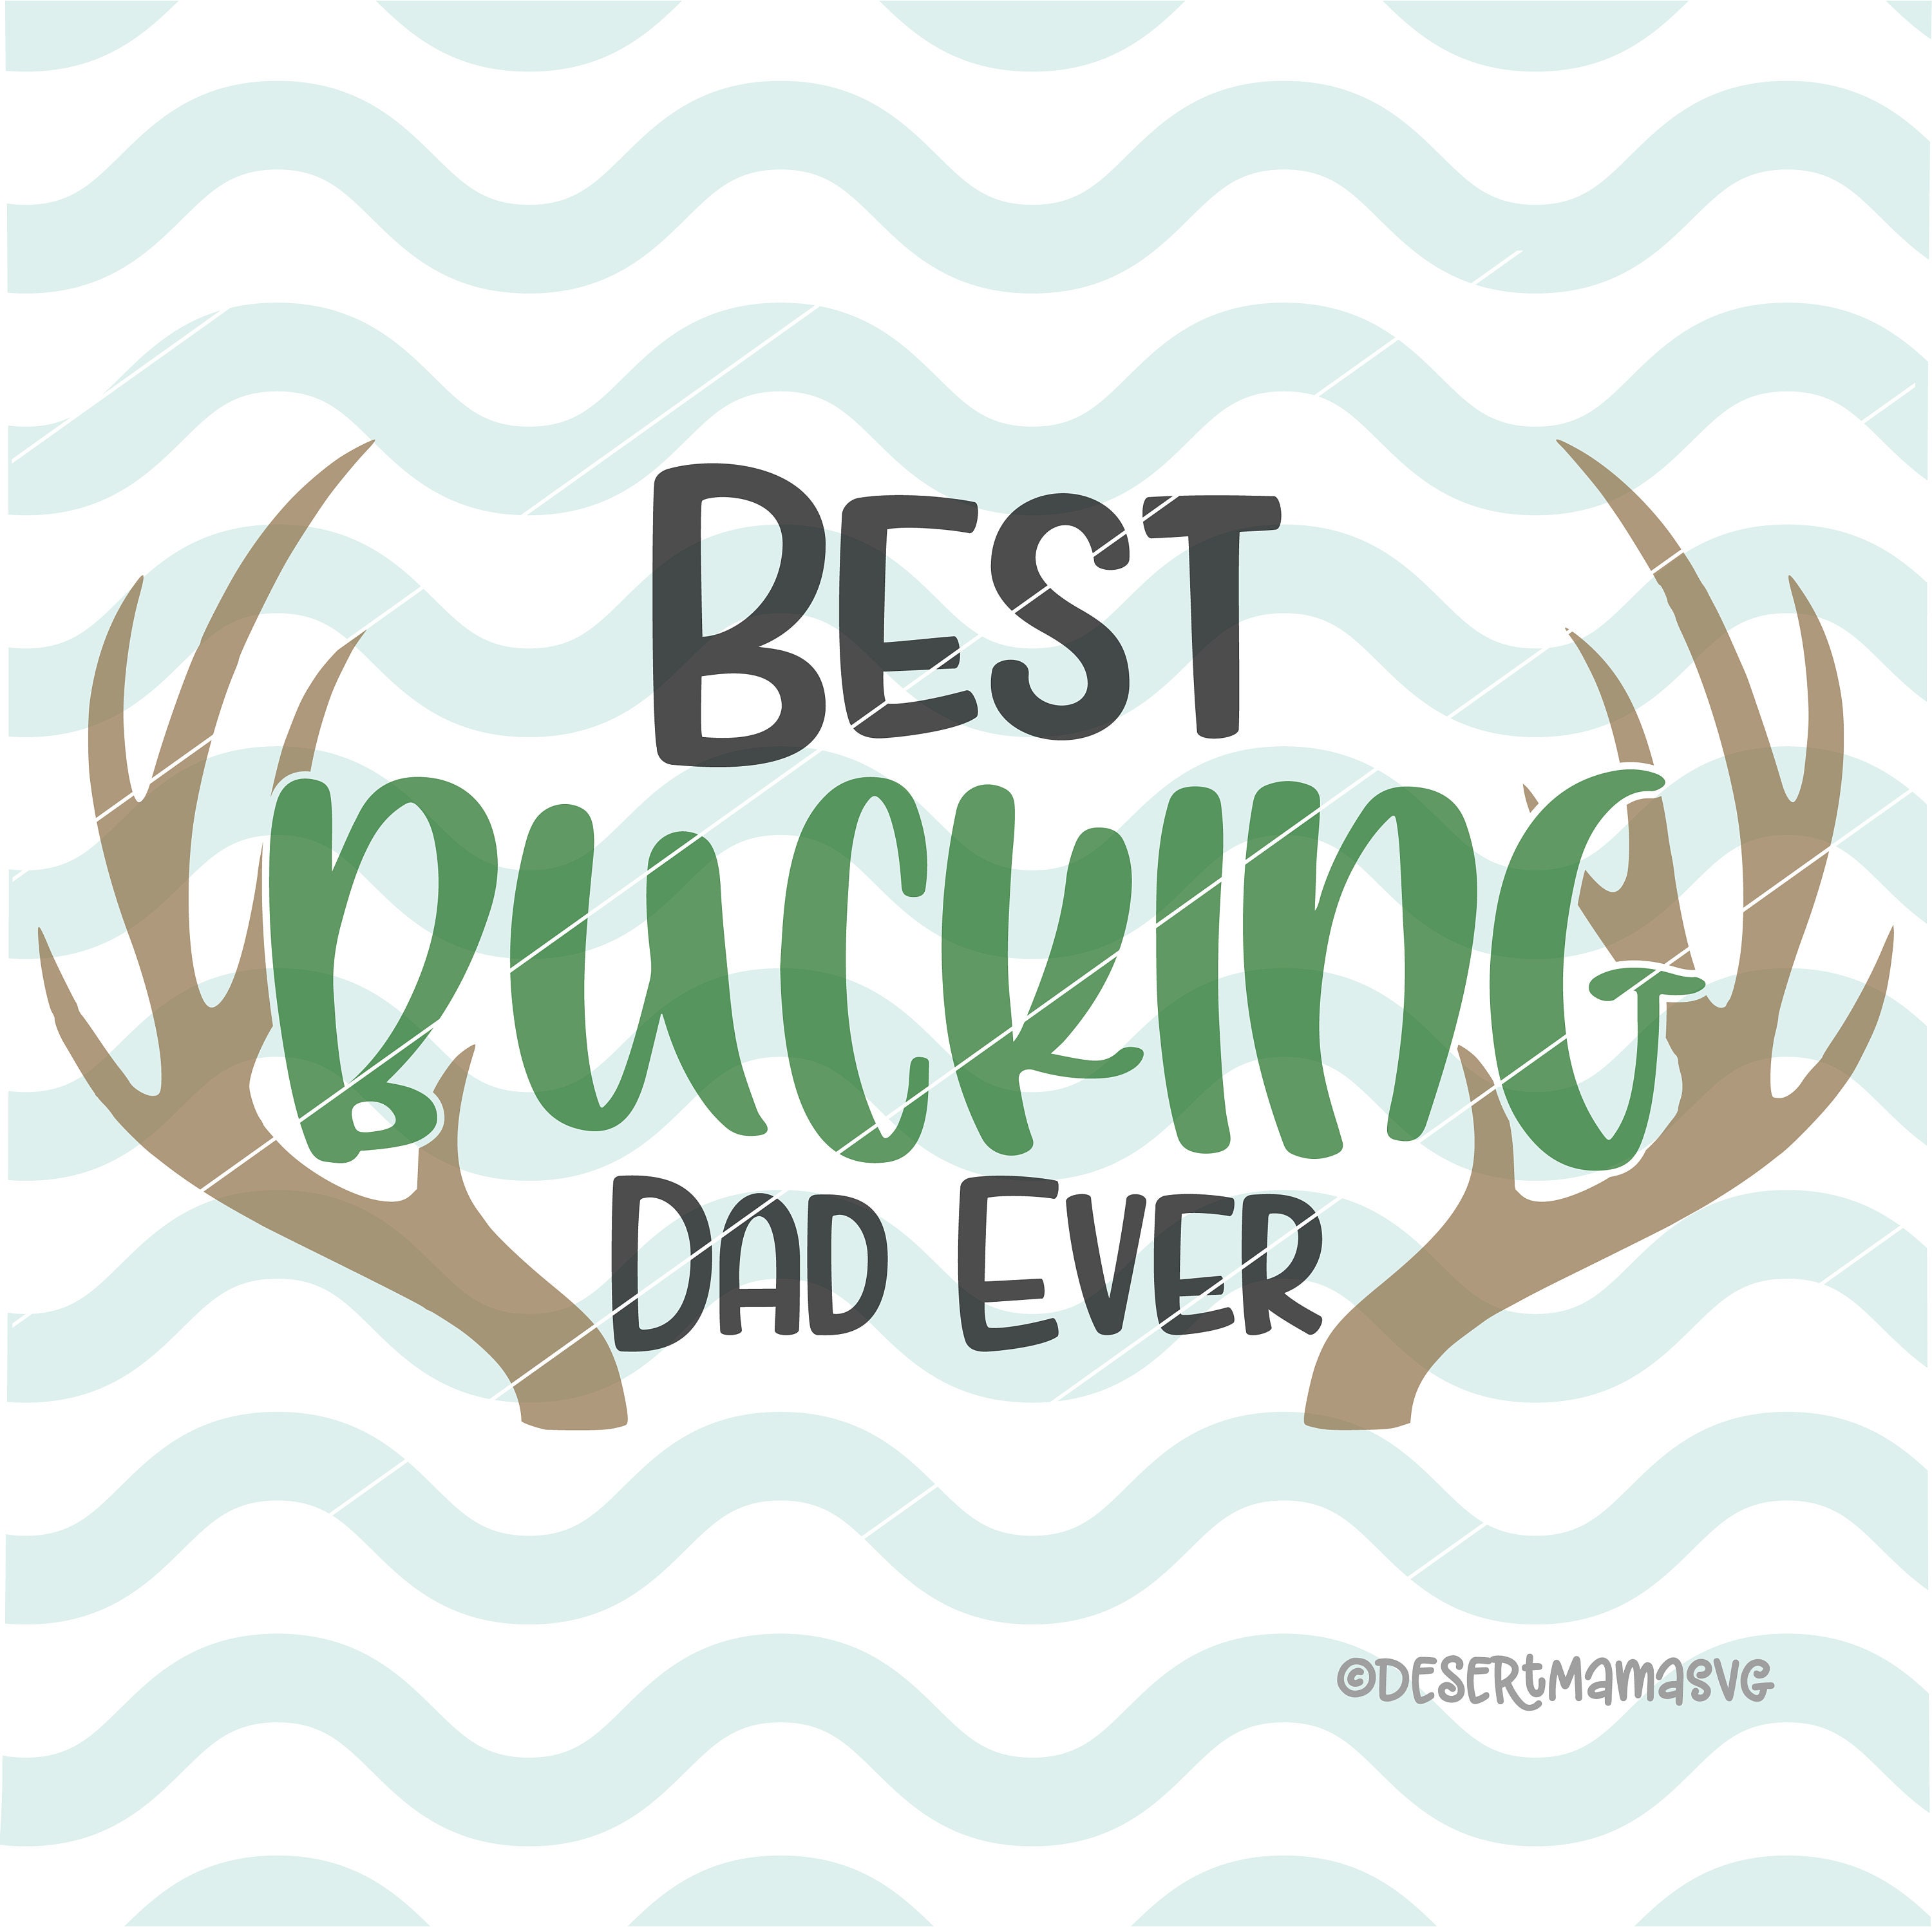 Download Best Bucking Dad Ever SVG Dxf Cricut Cameo Cut File | Etsy